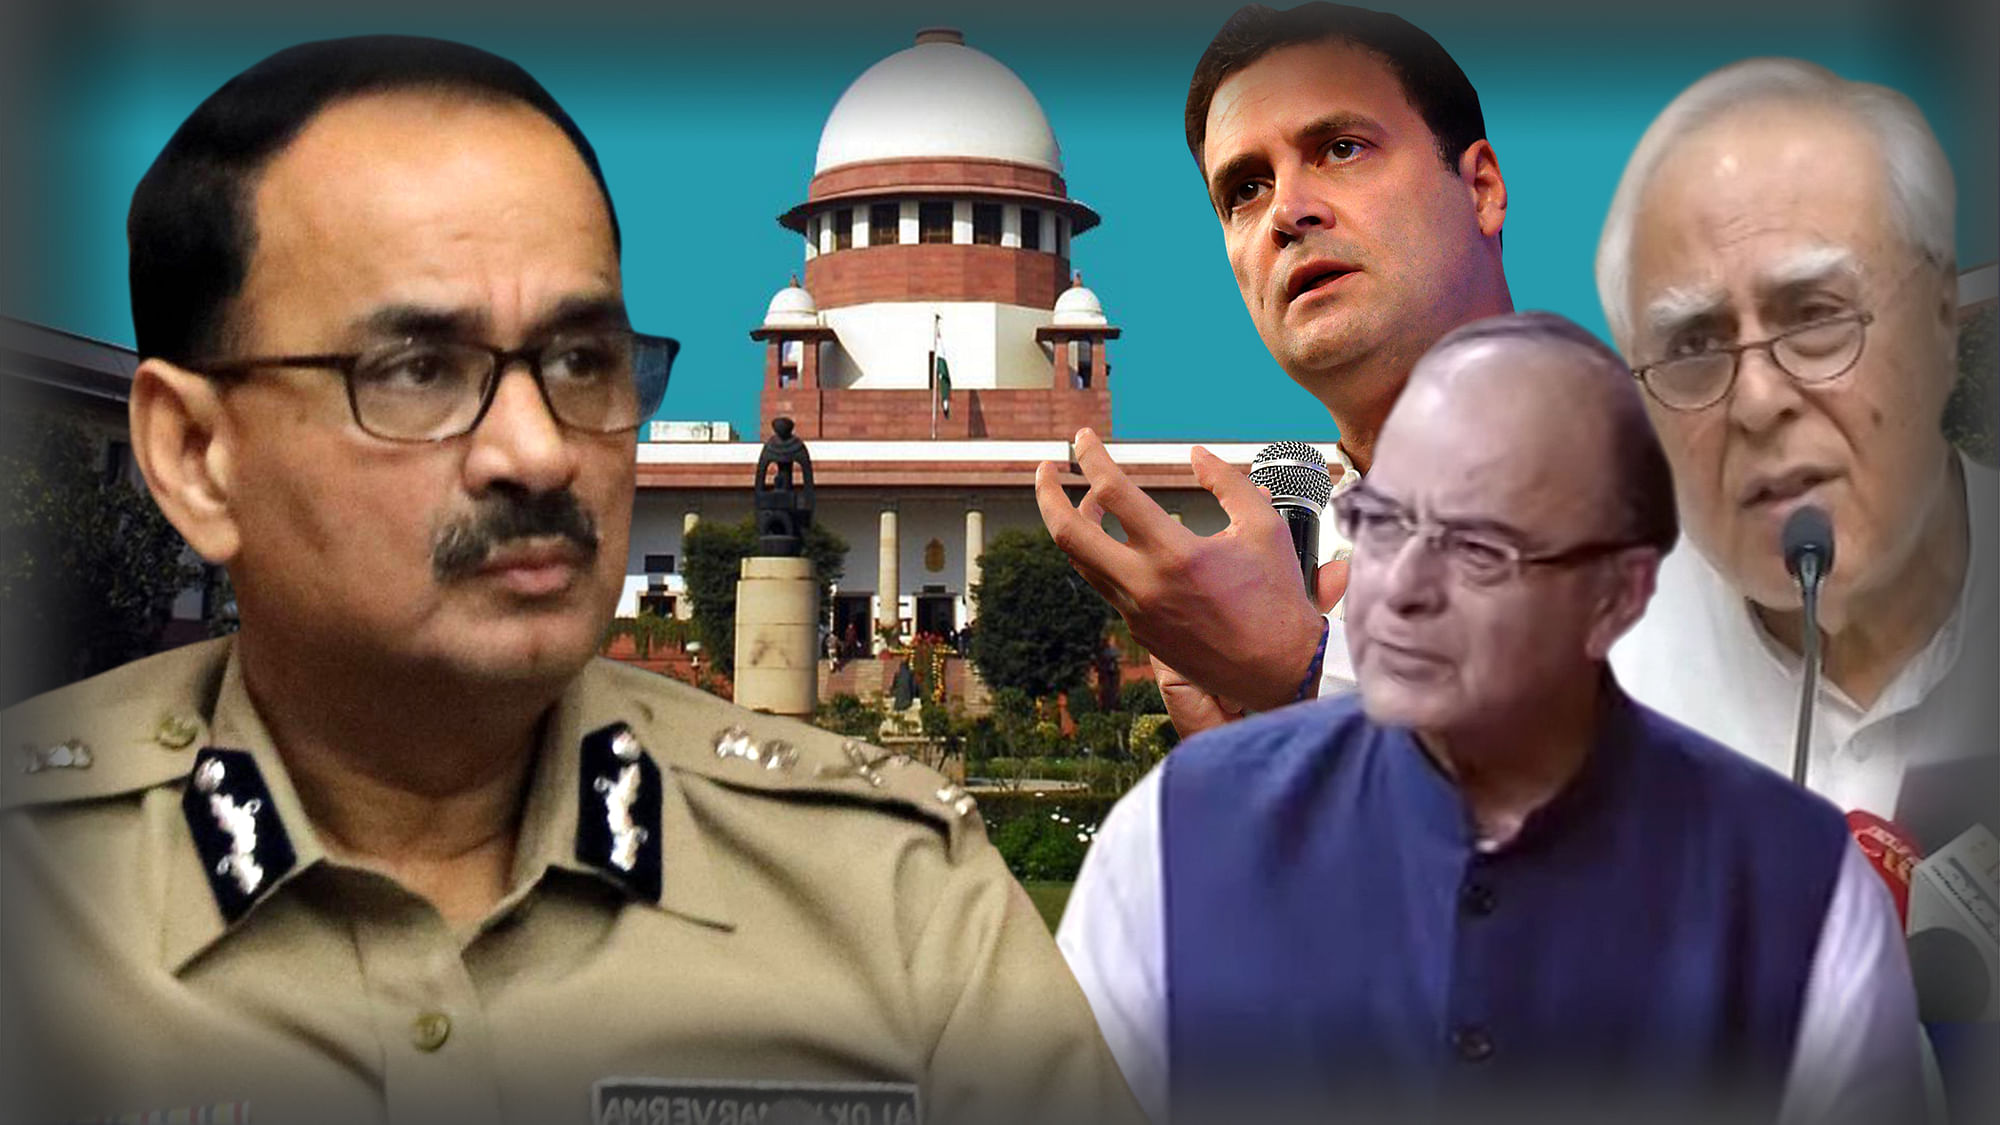 SC reinstated Alok verma as the CBI director, setting aside order passed by govt divesting Verma of his powers.